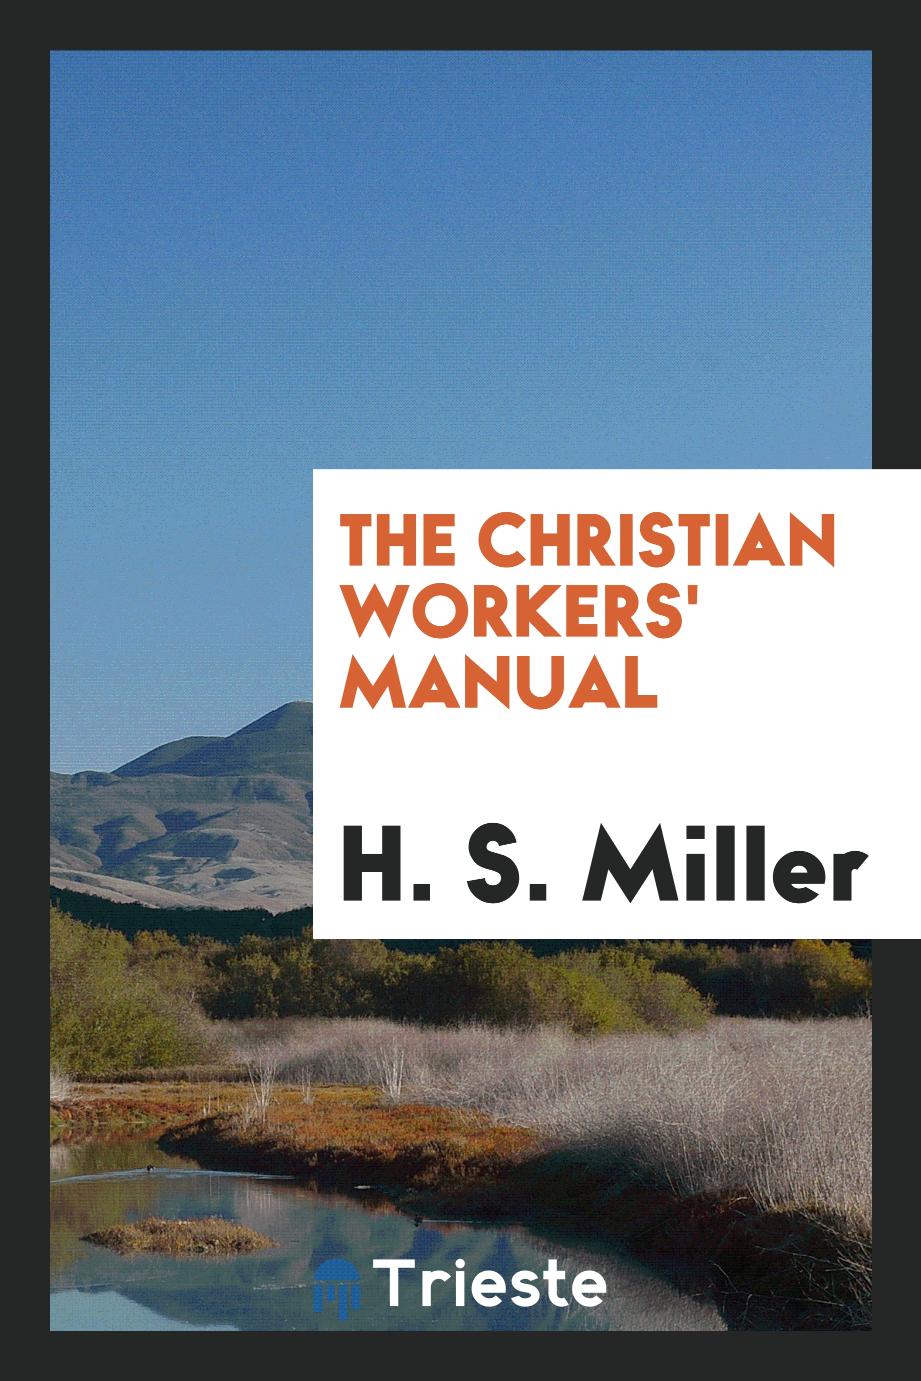 H. S. Miller - The Christian workers' manual